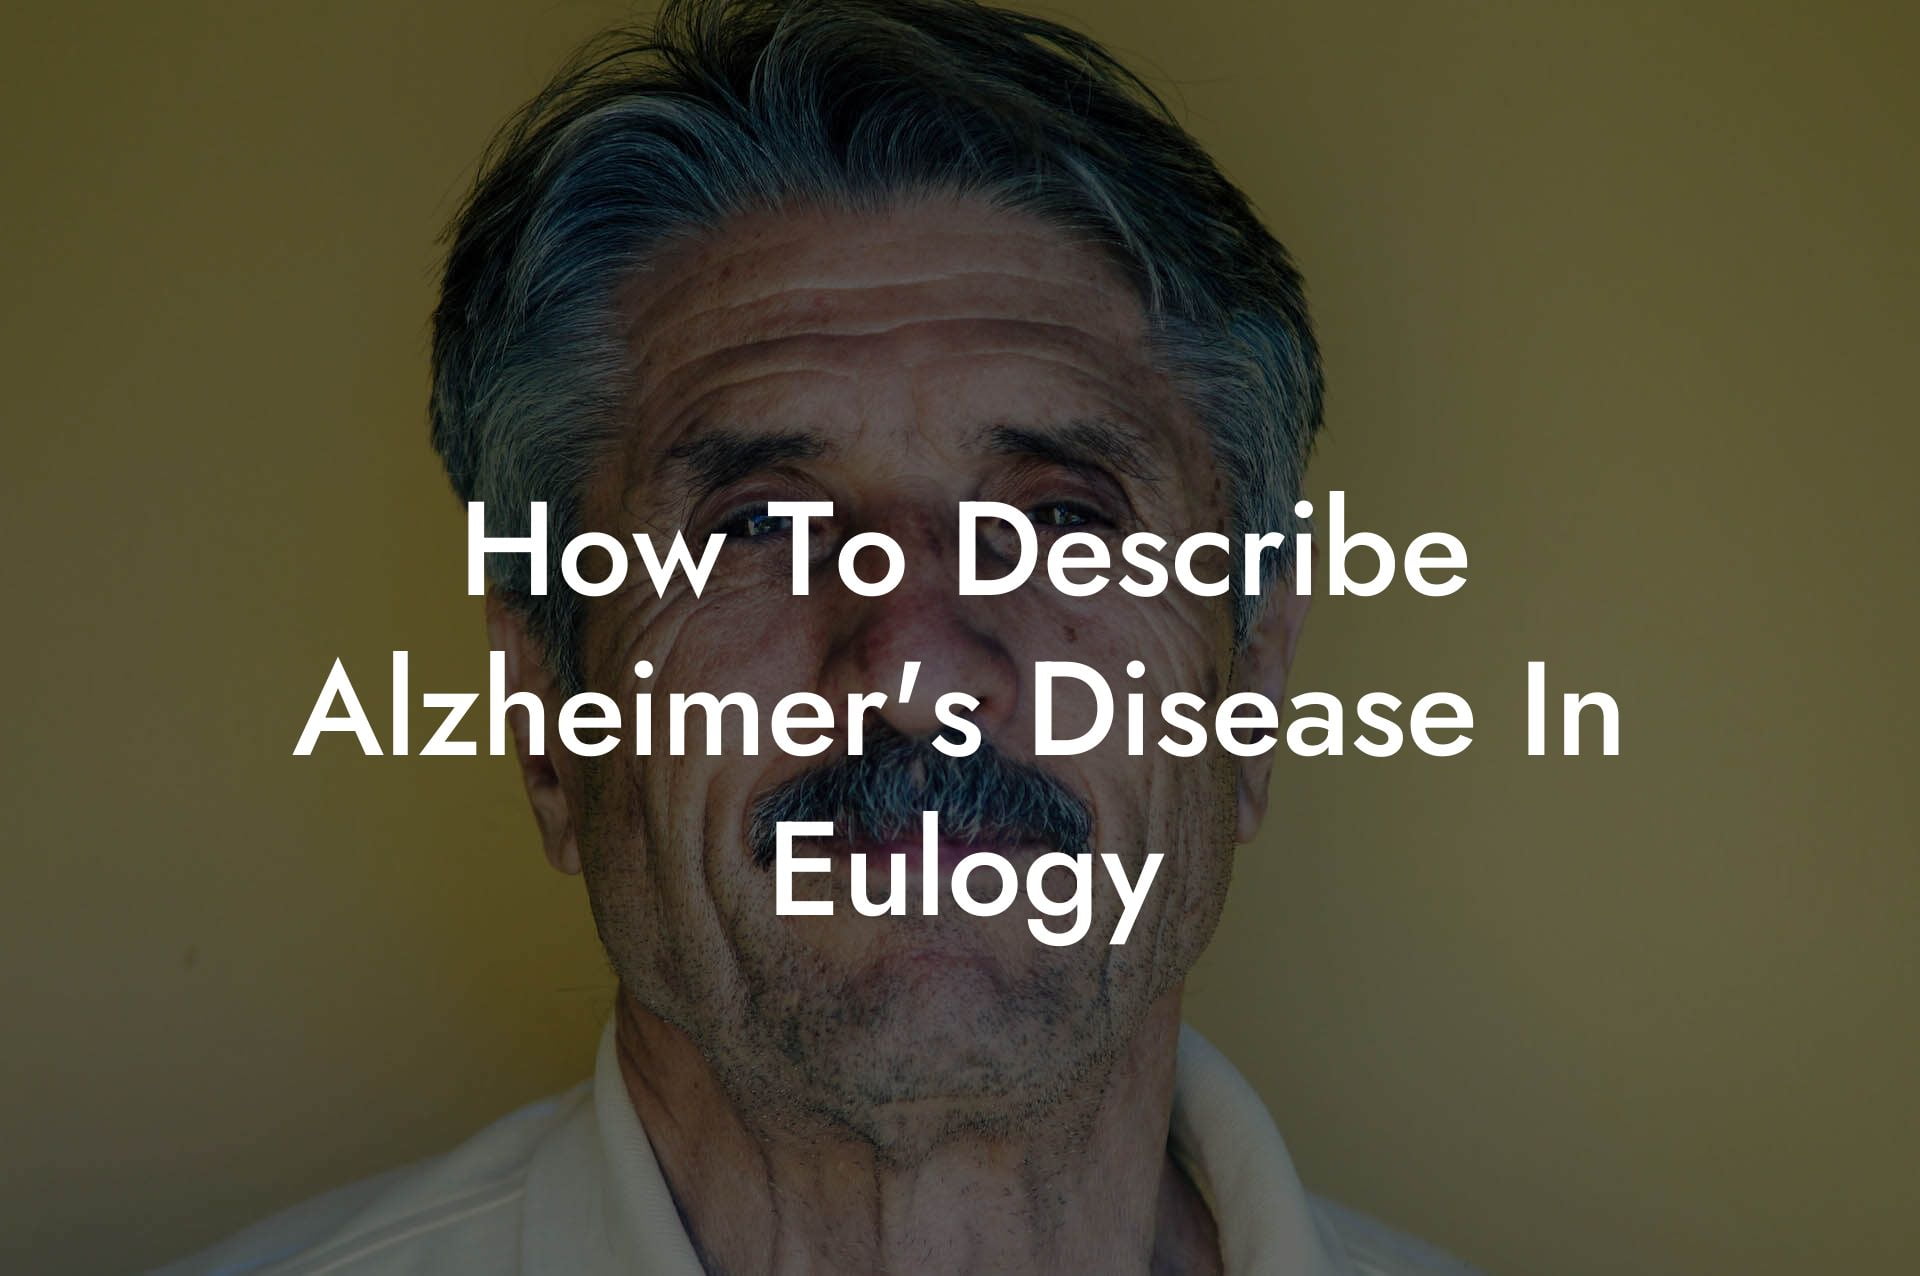 How To Describe Alzheimer's Disease In Eulogy